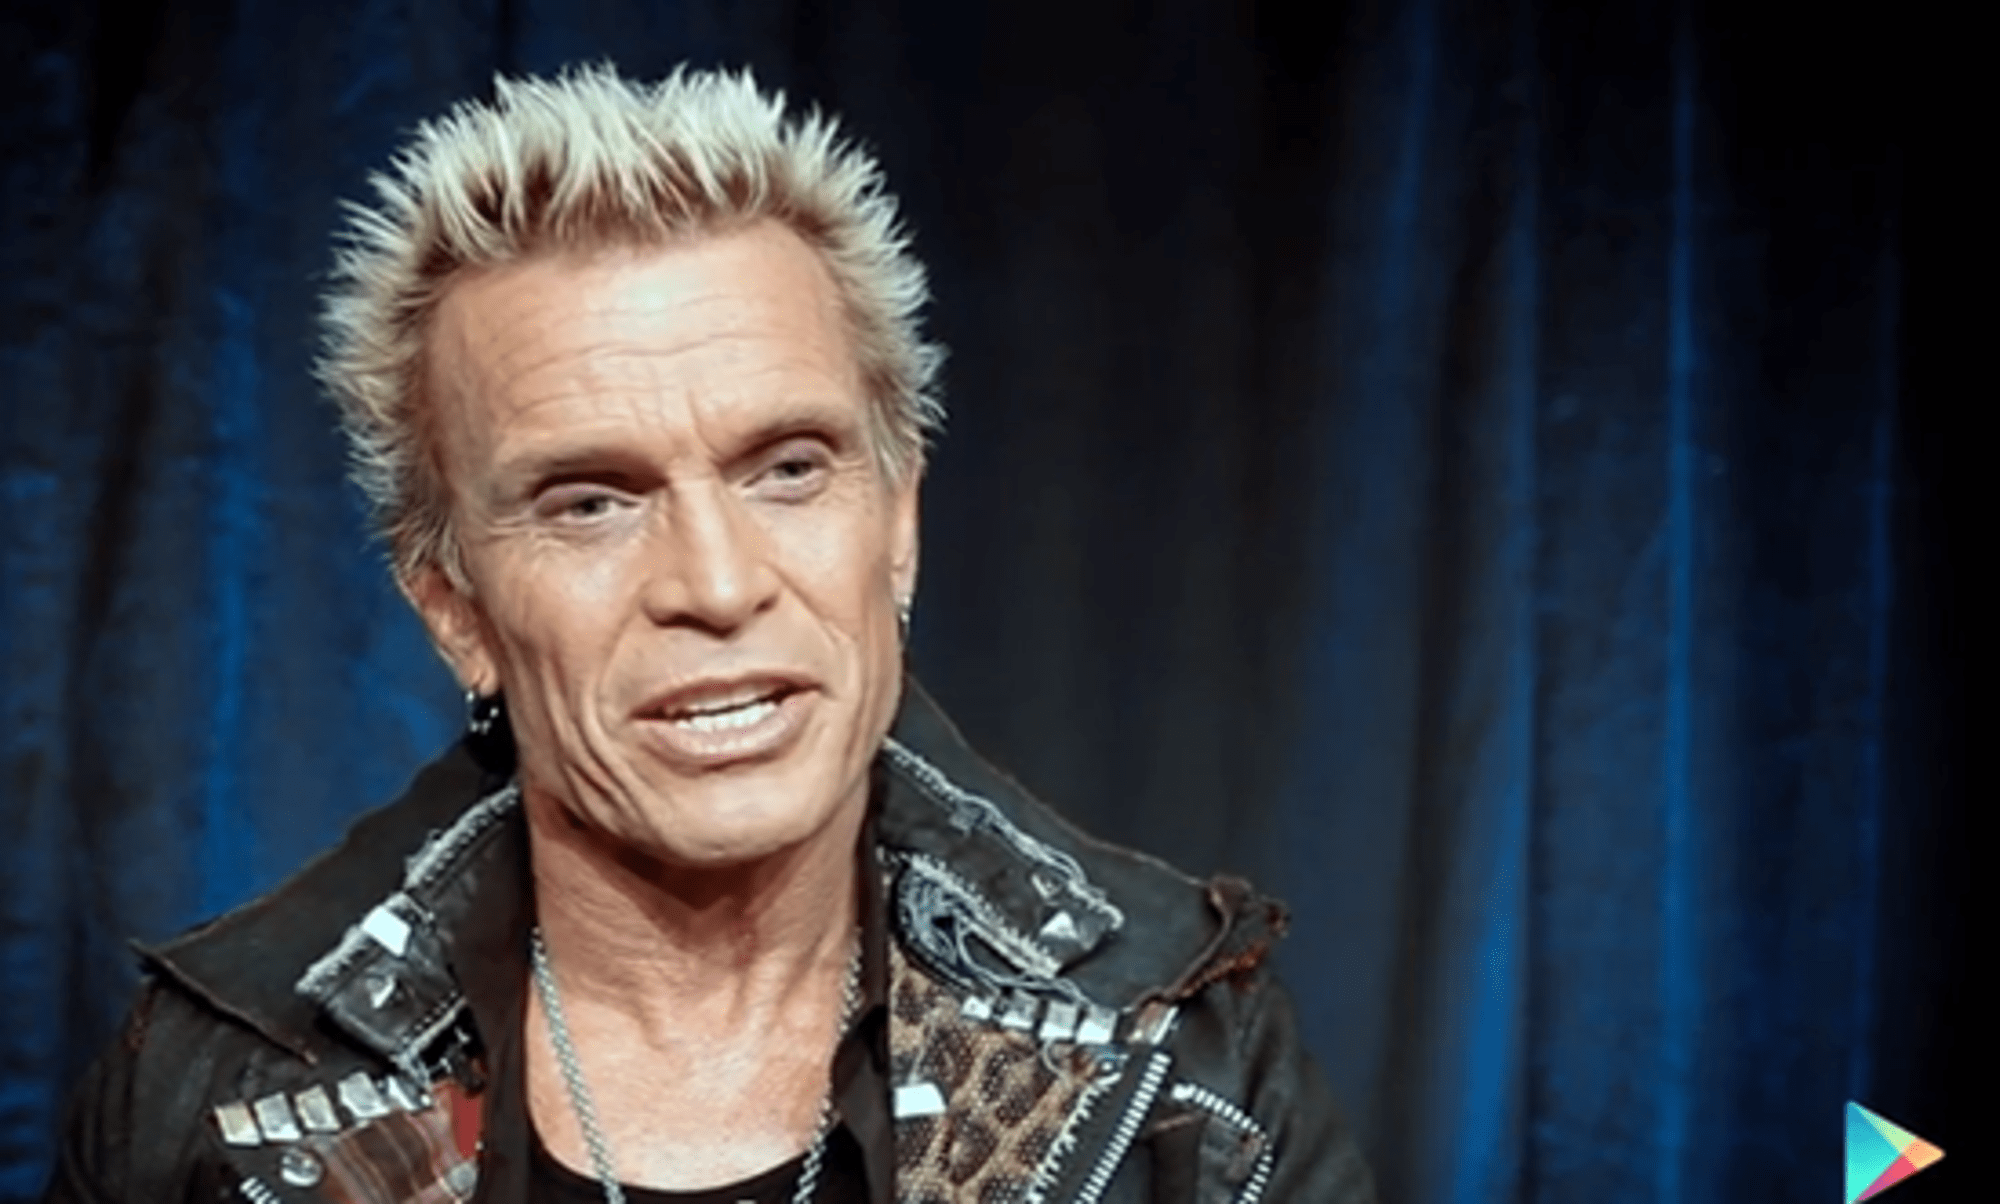 Billy Idol to release first album in a decade